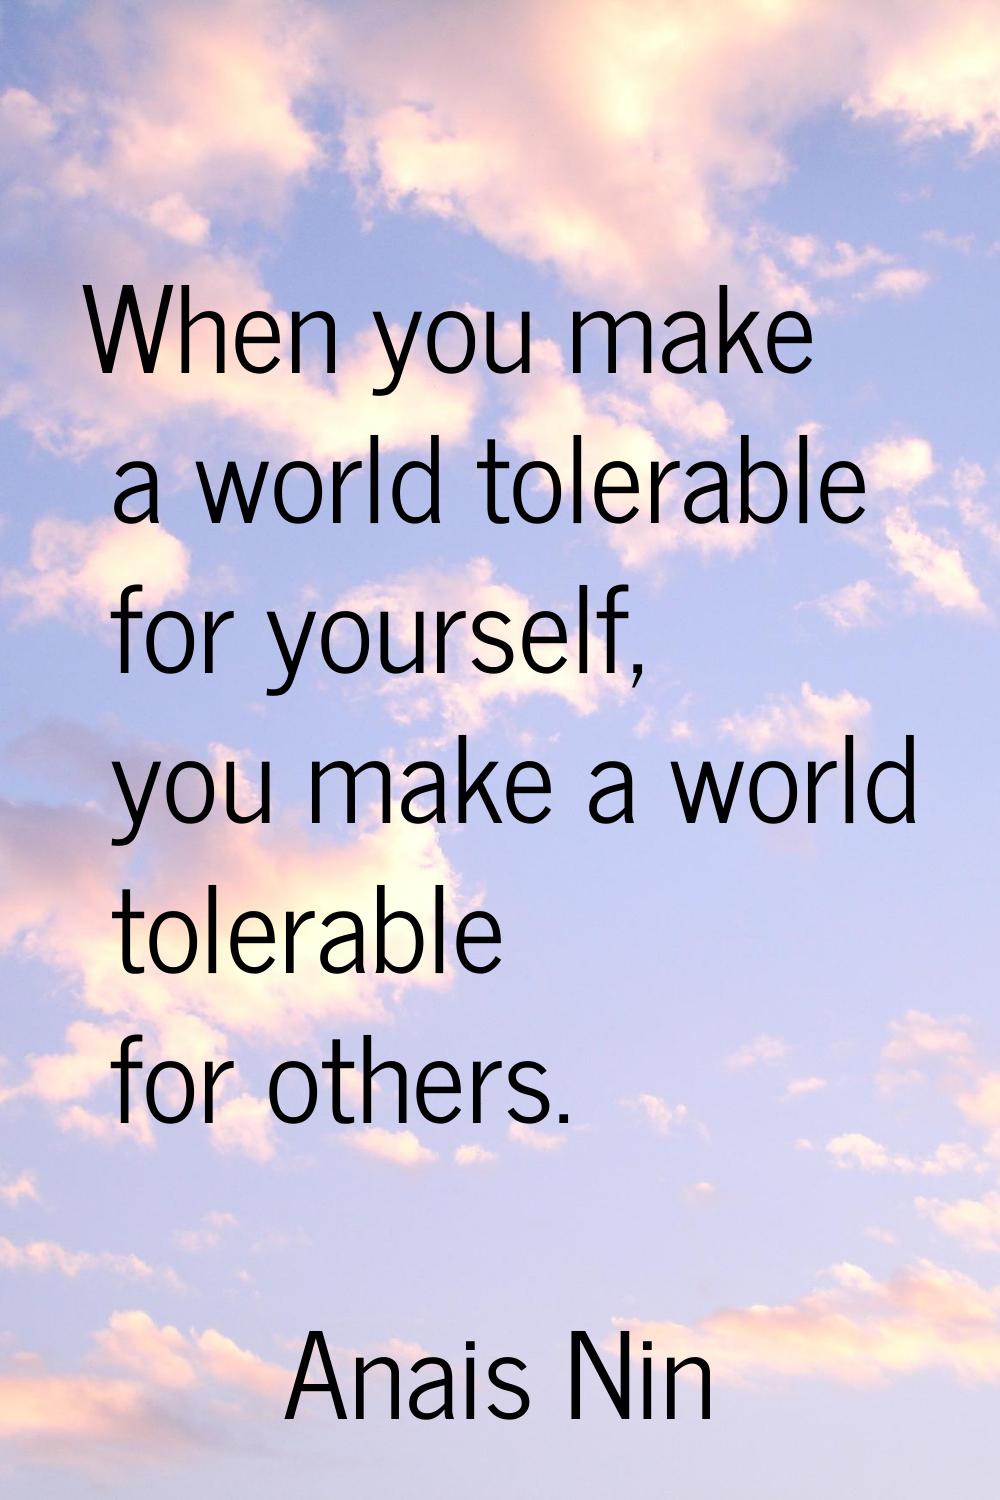 When you make a world tolerable for yourself, you make a world tolerable for others.